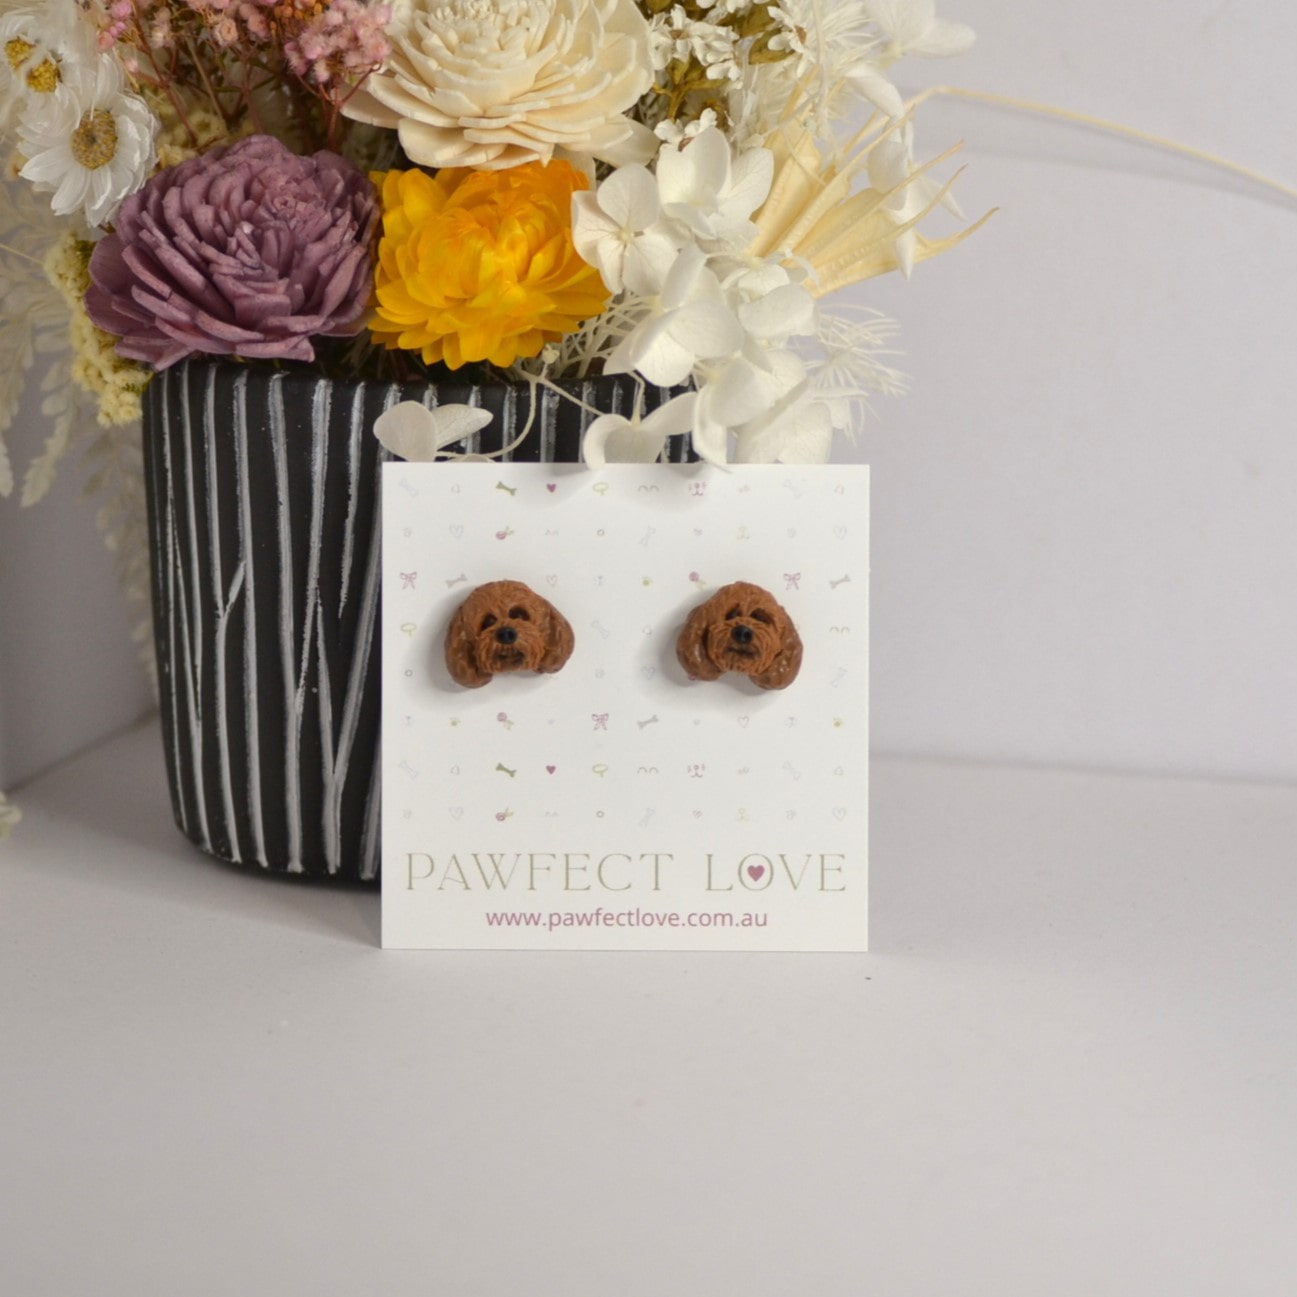 Handmade cavoodle stud earrings by Pawfect Love, positioned in front of dried flower arrangement